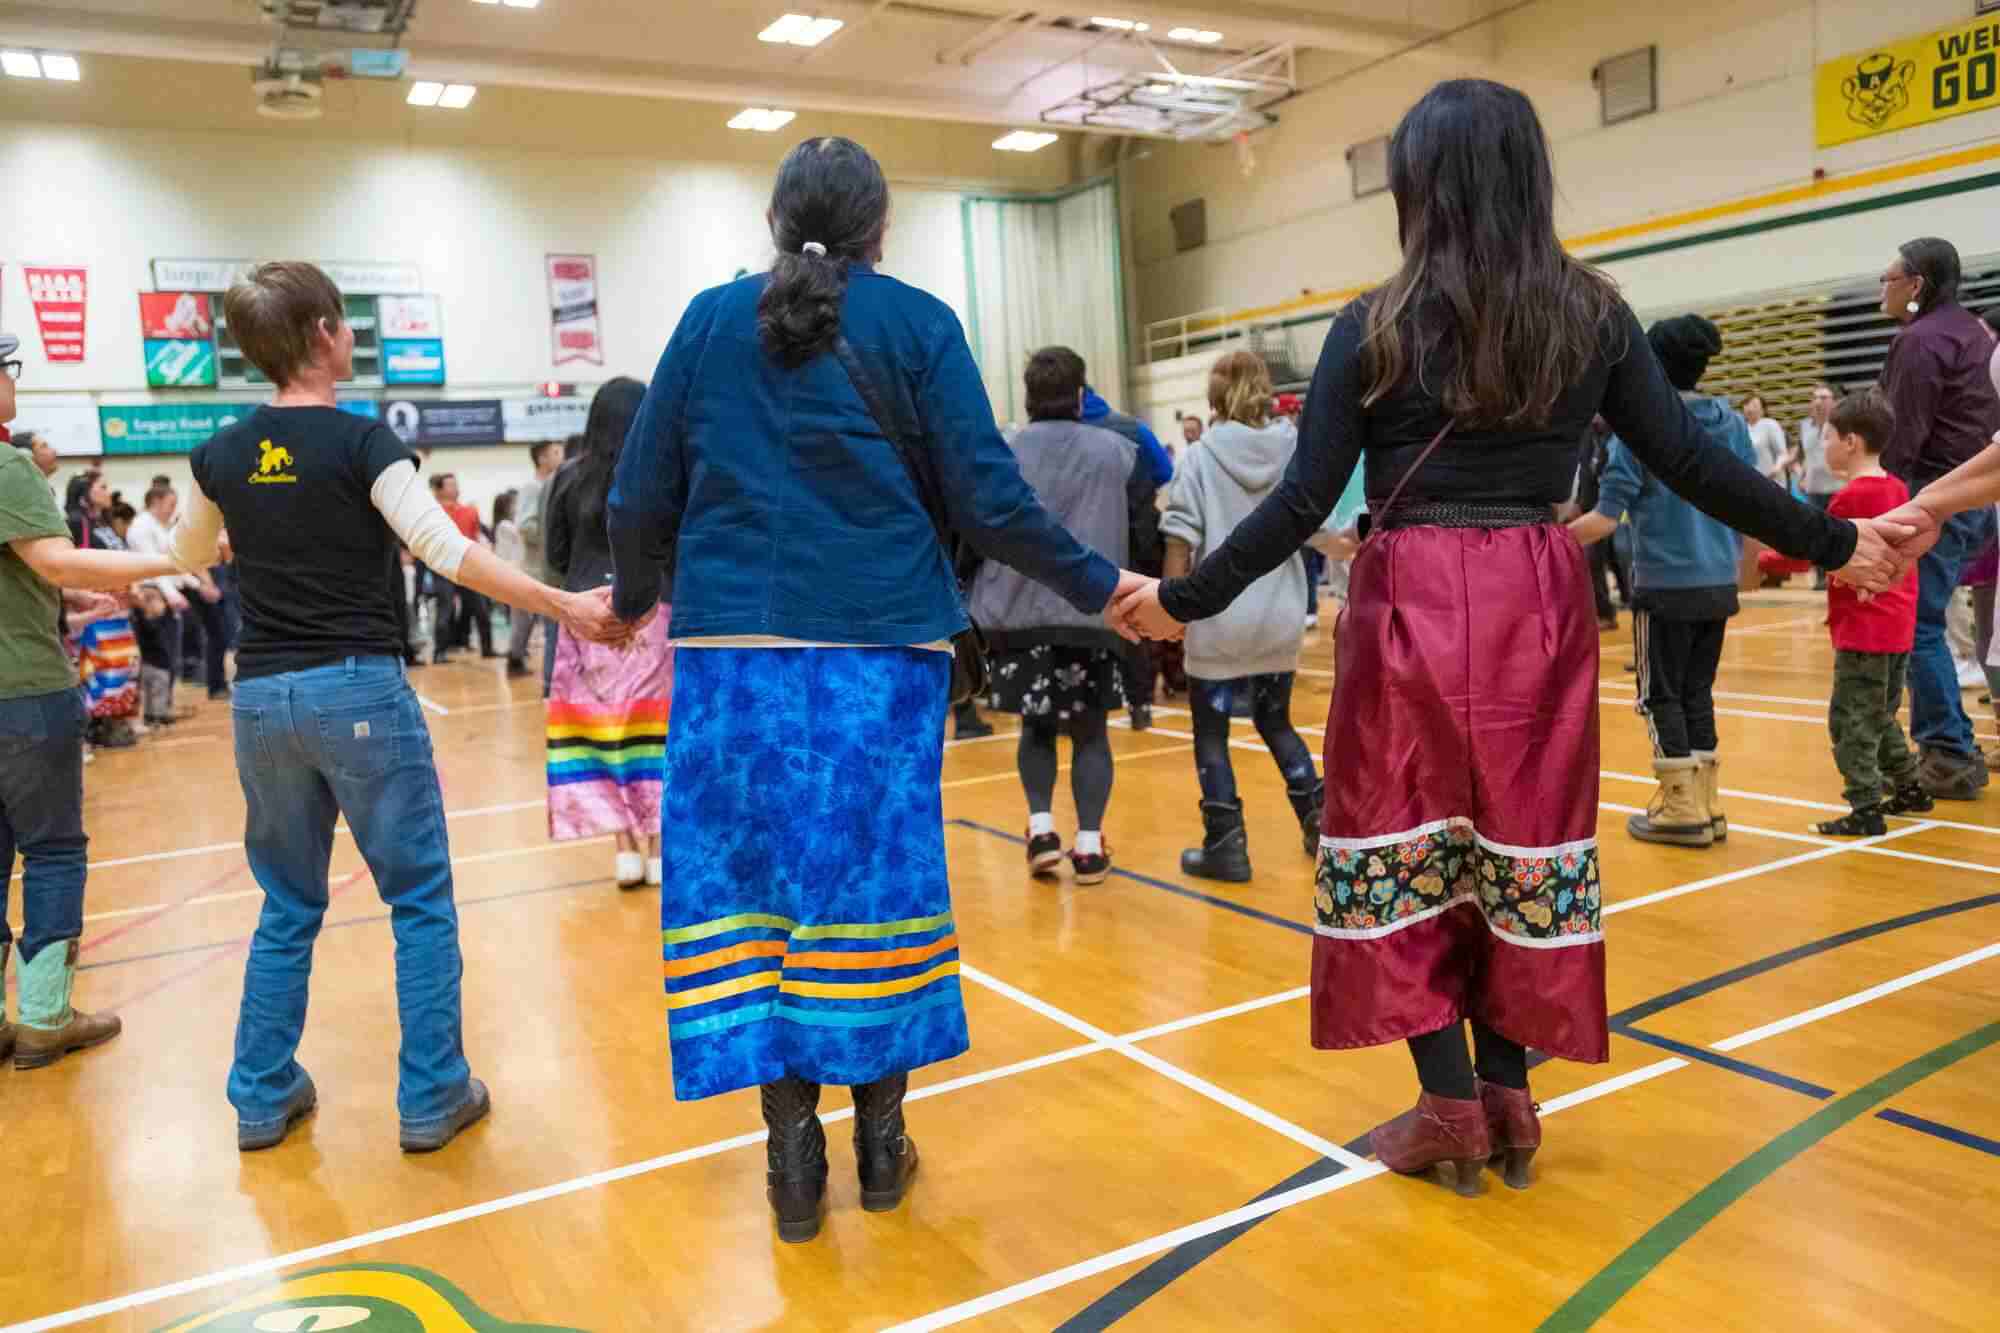 A group of people, some of them wearing ribbon skirts, holding hands at a Round Dance